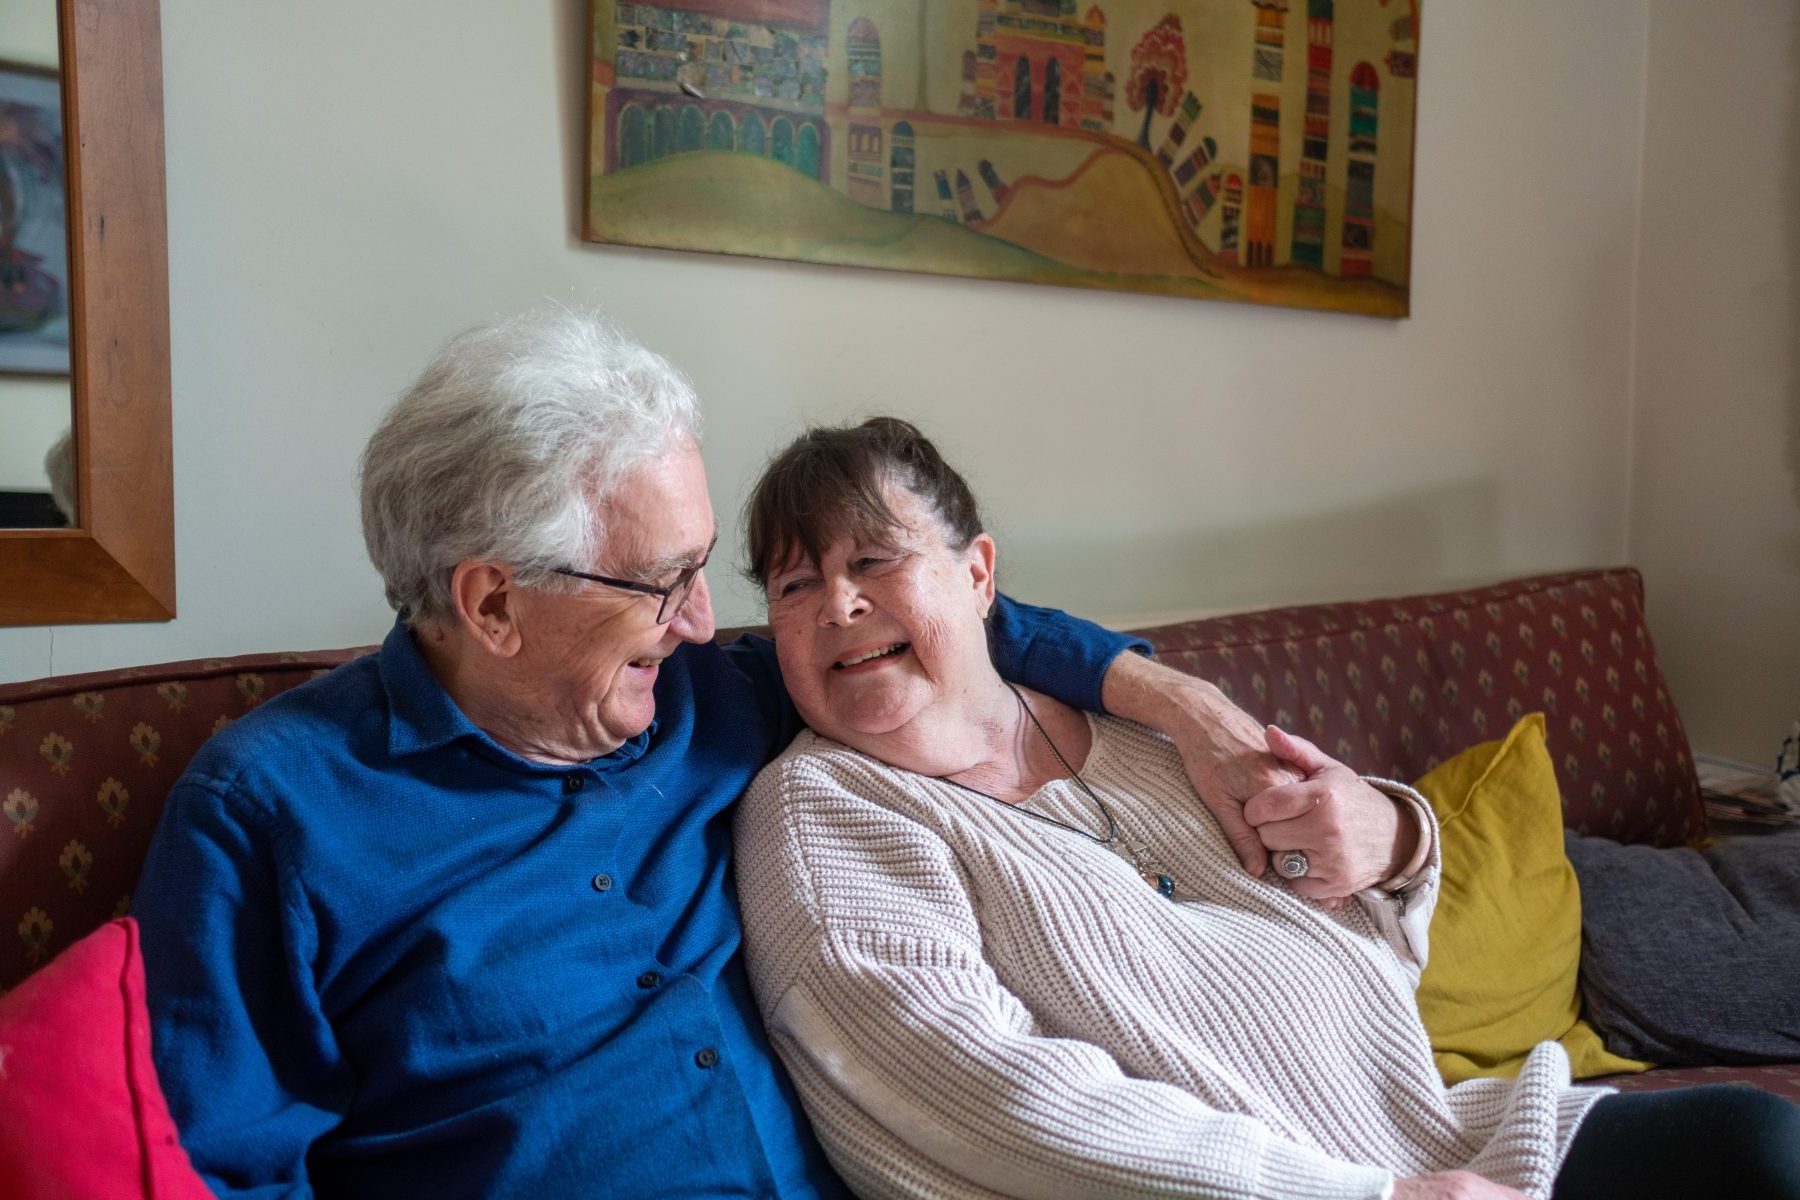 Older couple on a couch together smiling